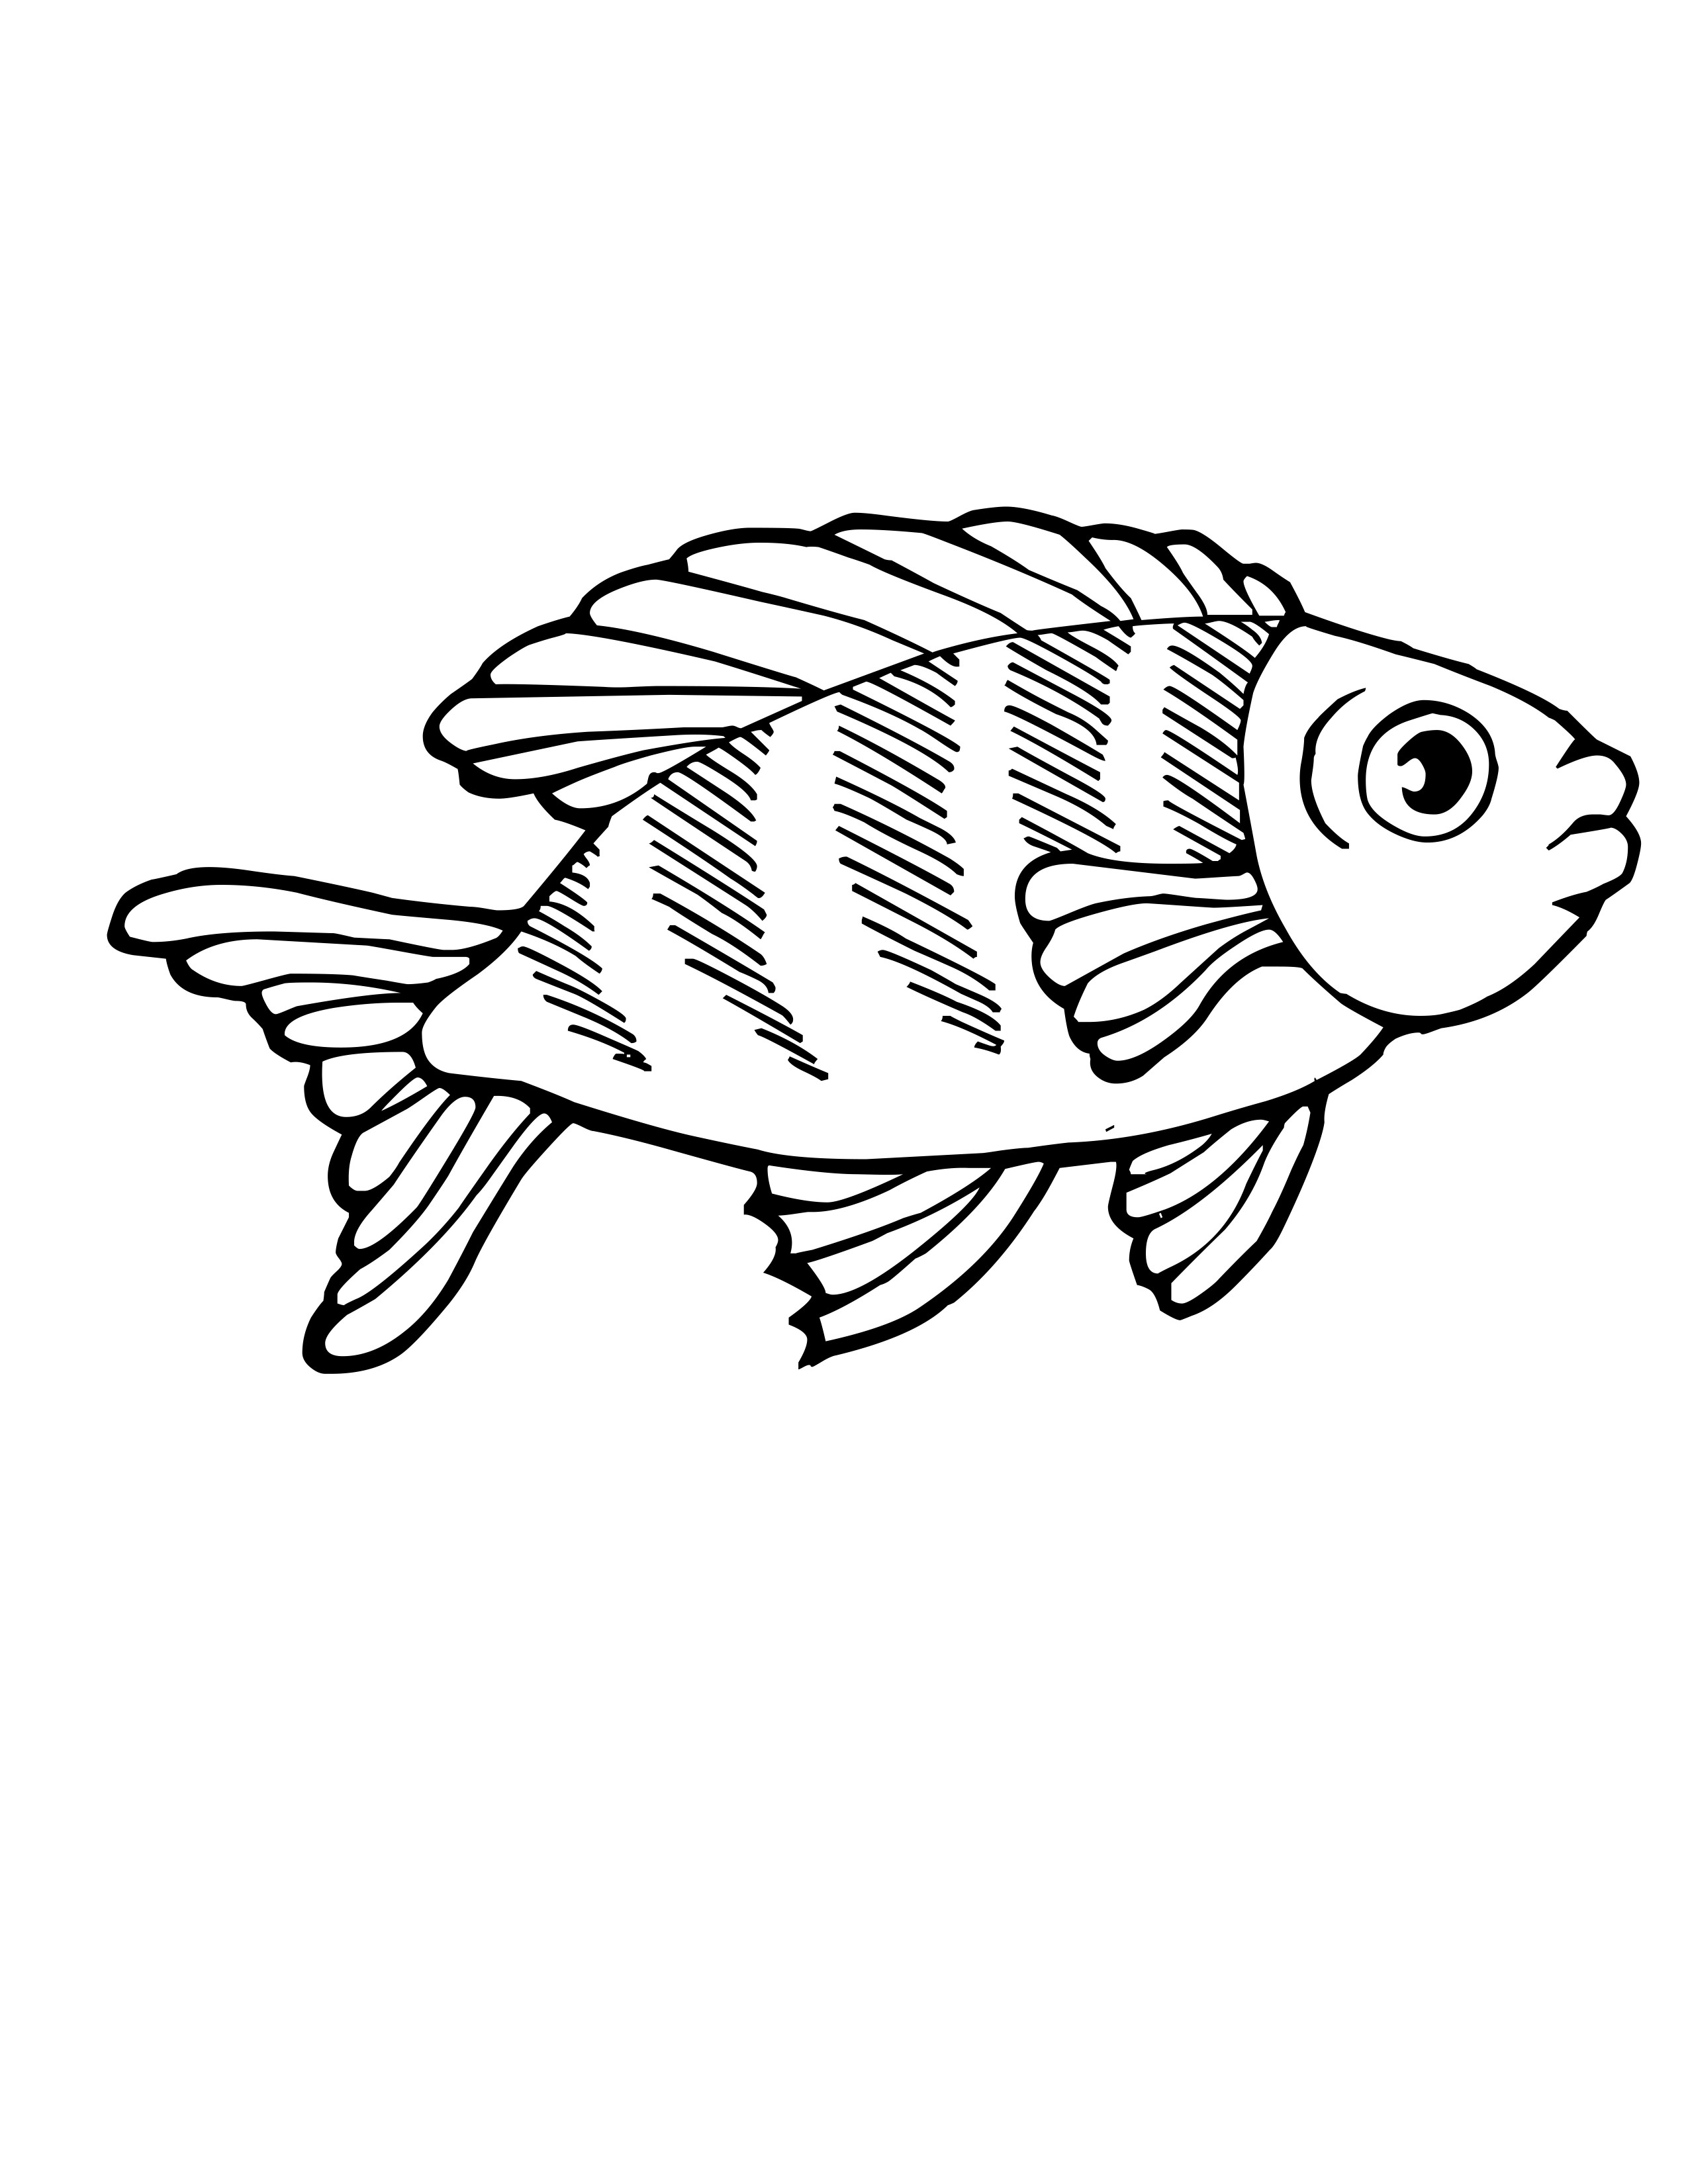 Cod Fish Coloring Pages at Free printable colorings